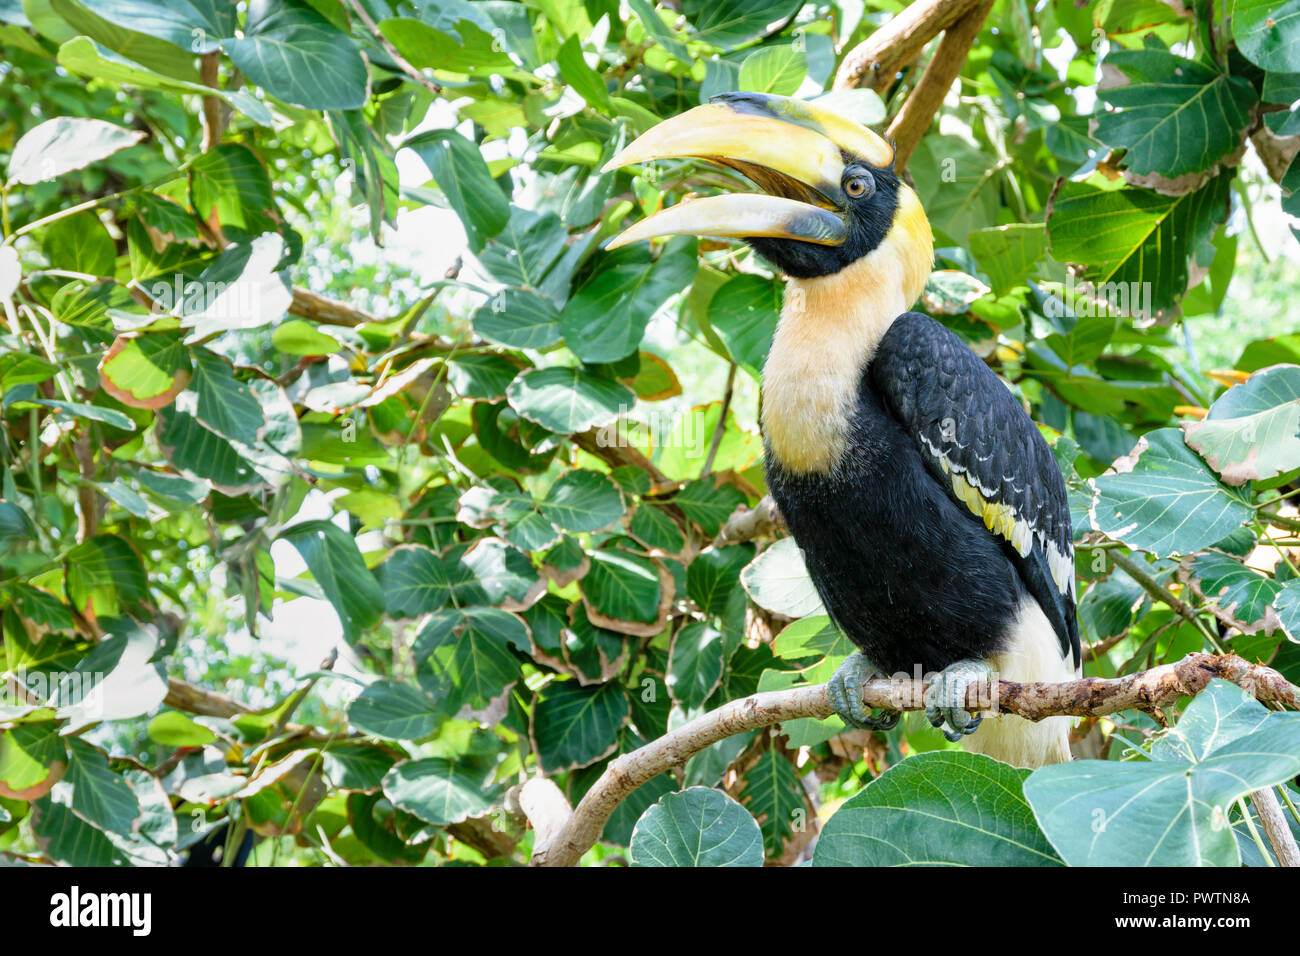 Males Great Hornbill or Buceros bicornis. It is a large bird with white and black feathers and bright yellow and black casque on top of its massive bi Stock Photo